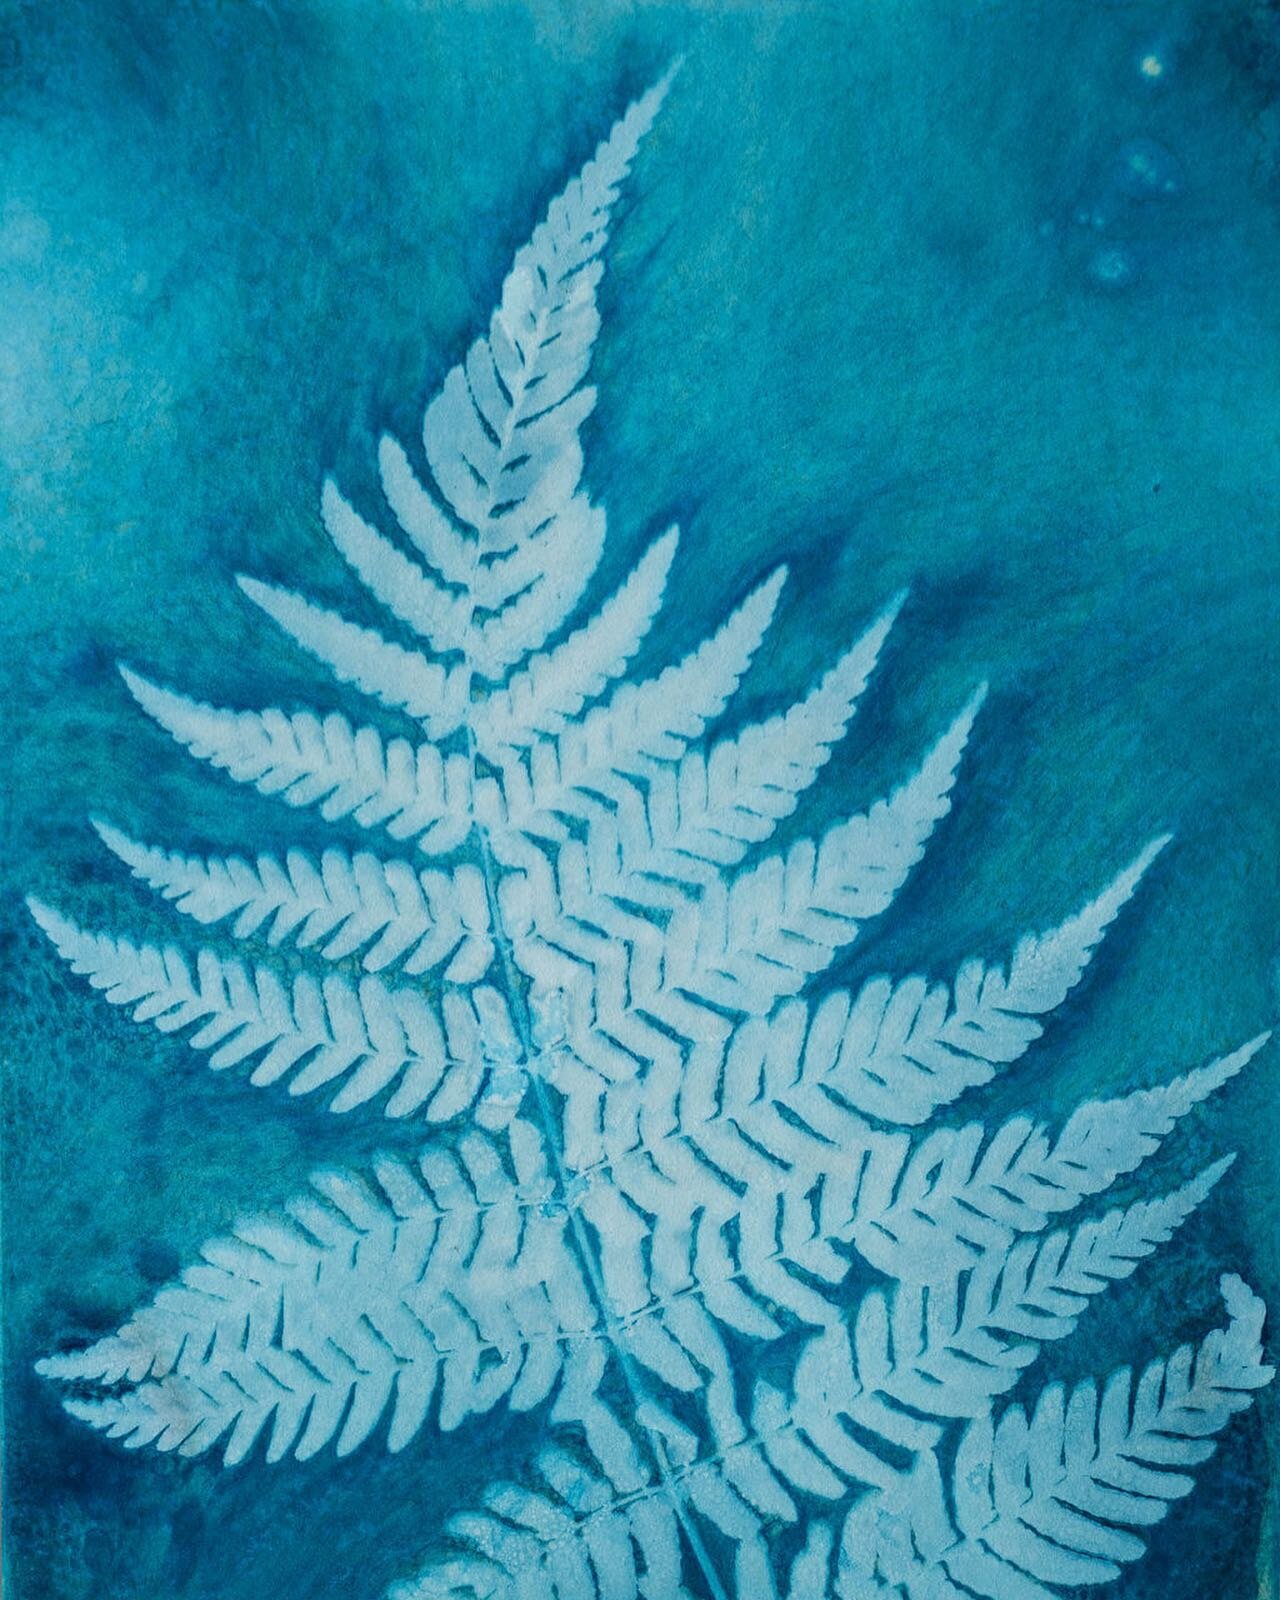 This original fern cyanotype found a home today! I am always excited to see a collector get excited over a piece of my work. 

I also learned today that my website has some hiccups. It is not allowing purchases and I have not figured out why, yet. I 